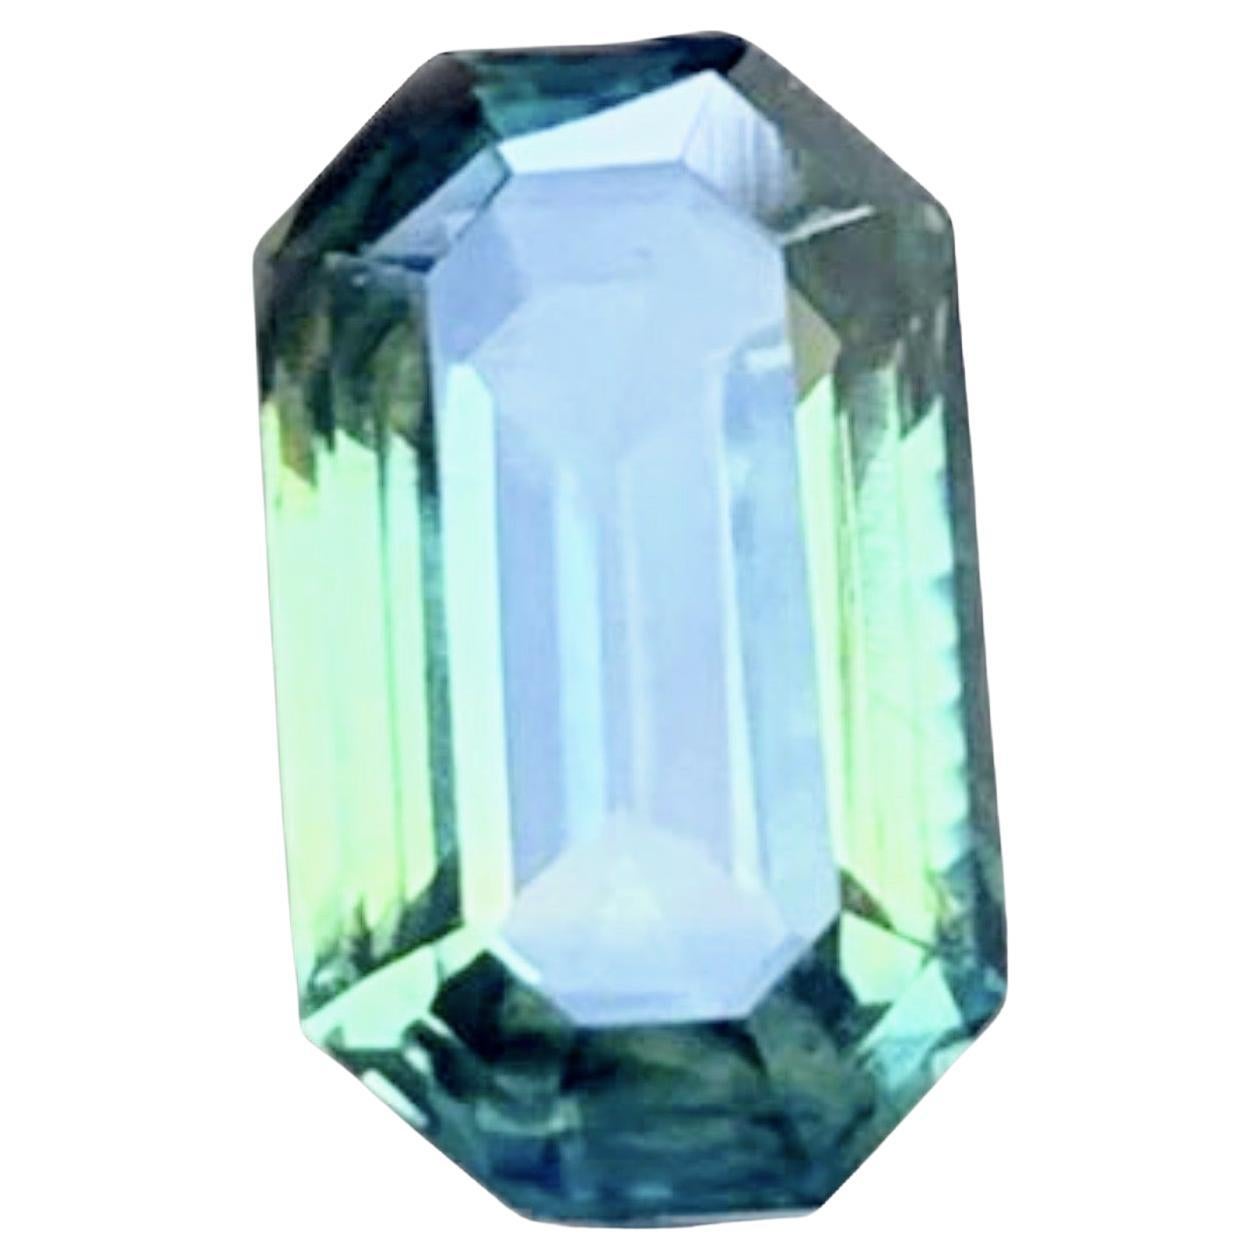 1.8ct Emerald Cut LOUPE CLEAN Natural Teal Blue Sapphire Gemstone For Sale